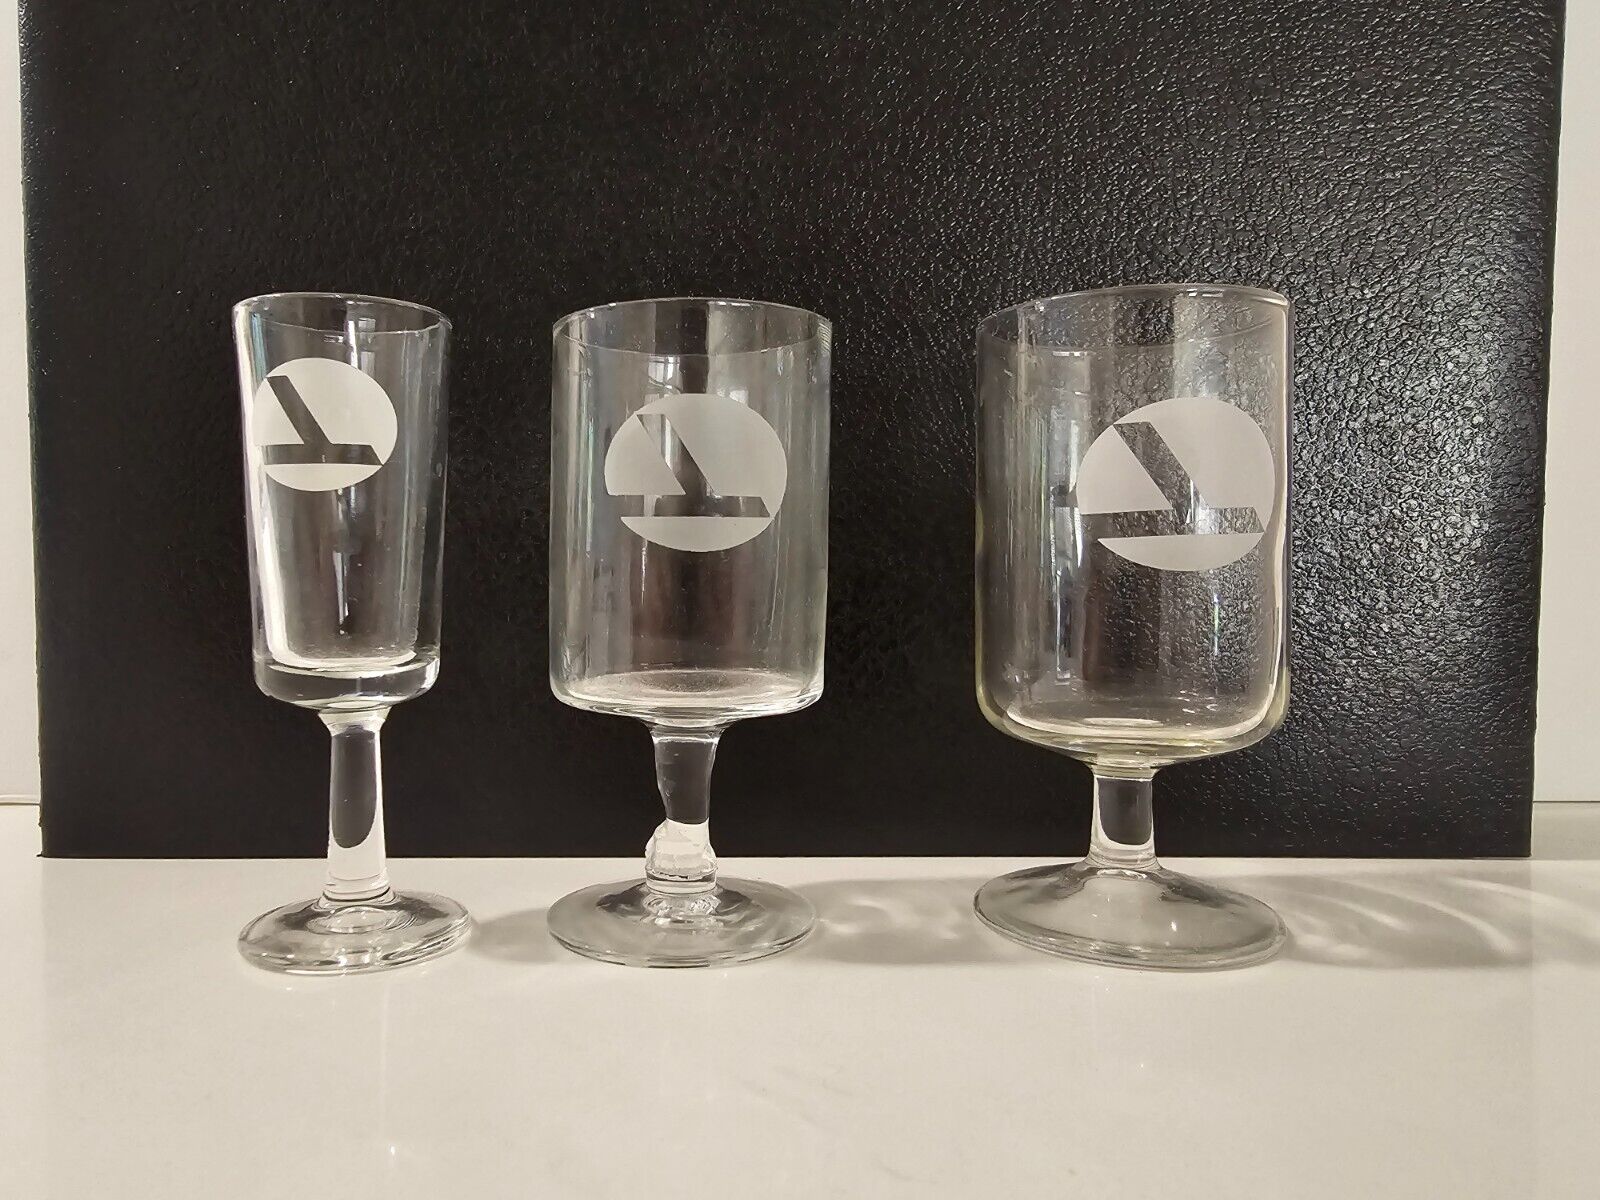 Eastern Airlines Liquor 3 First Class Glass - Wings of Man Logo